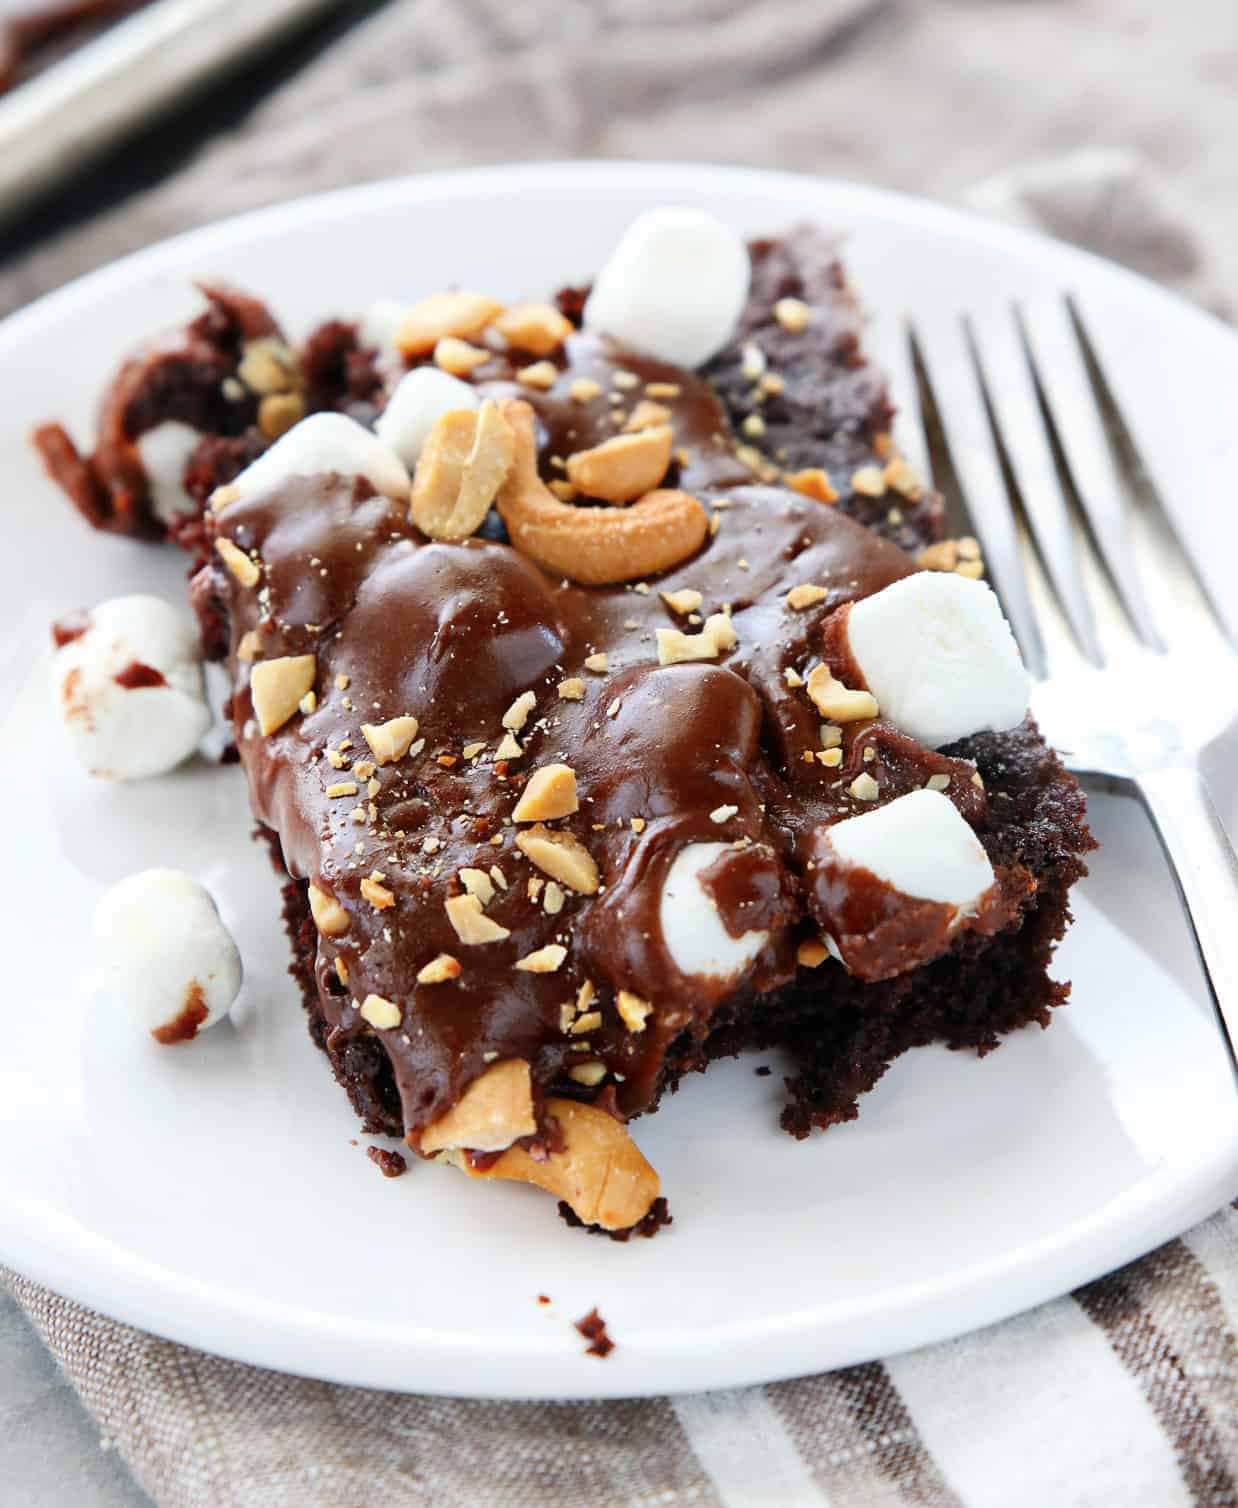 Chocolate Sheet Cake with Toppings